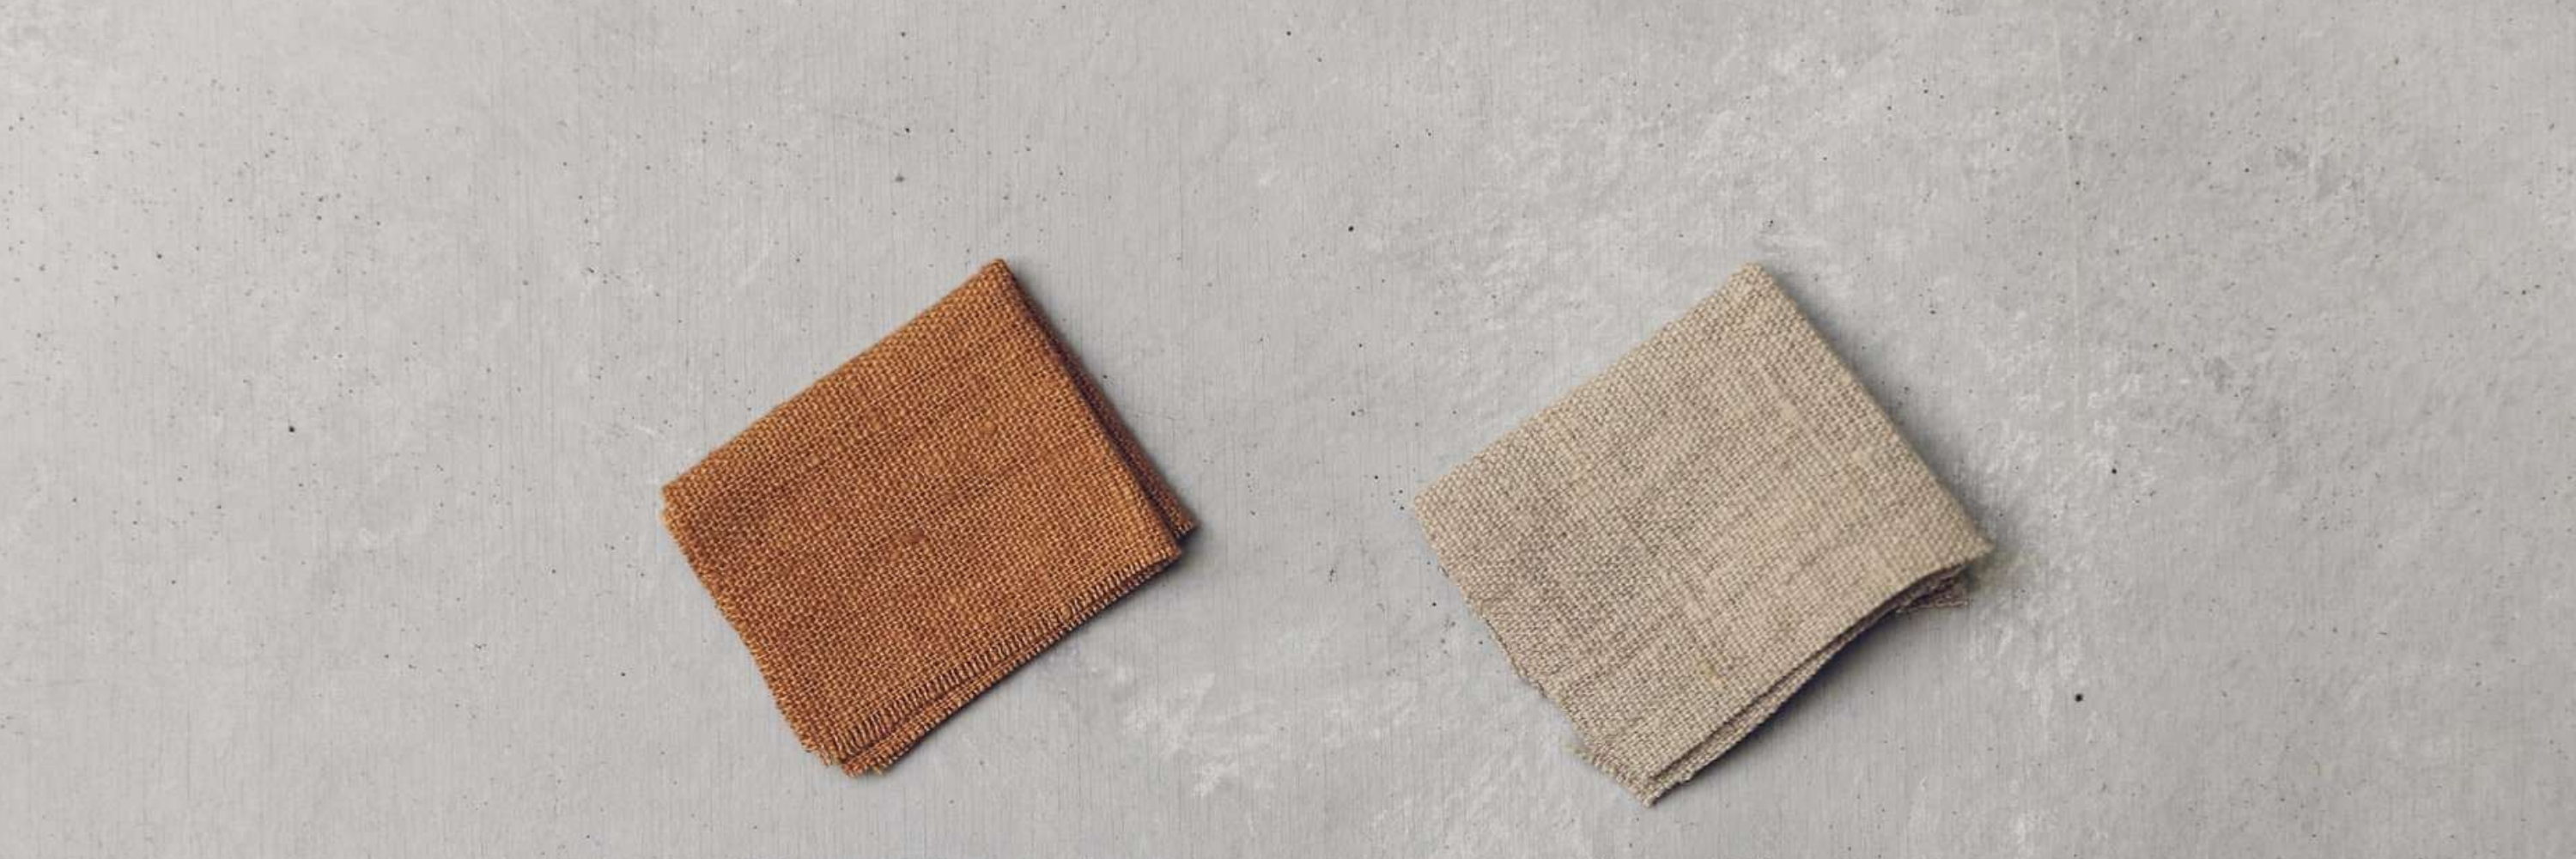 Two folded pieces of heavy linen fabric.